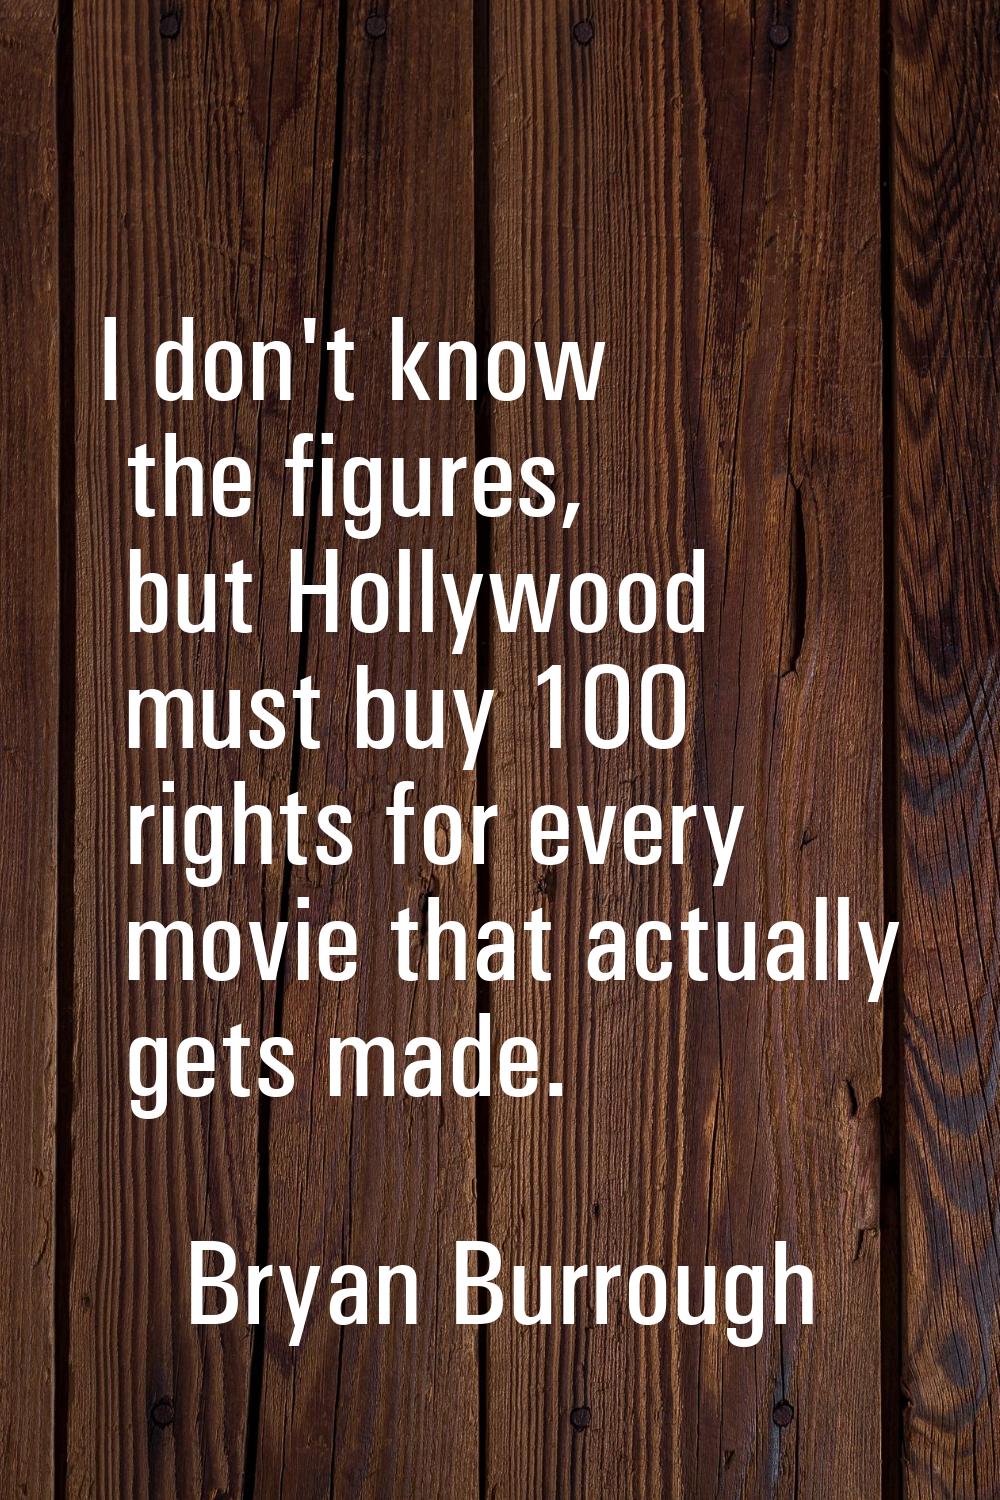 I don't know the figures, but Hollywood must buy 100 rights for every movie that actually gets made